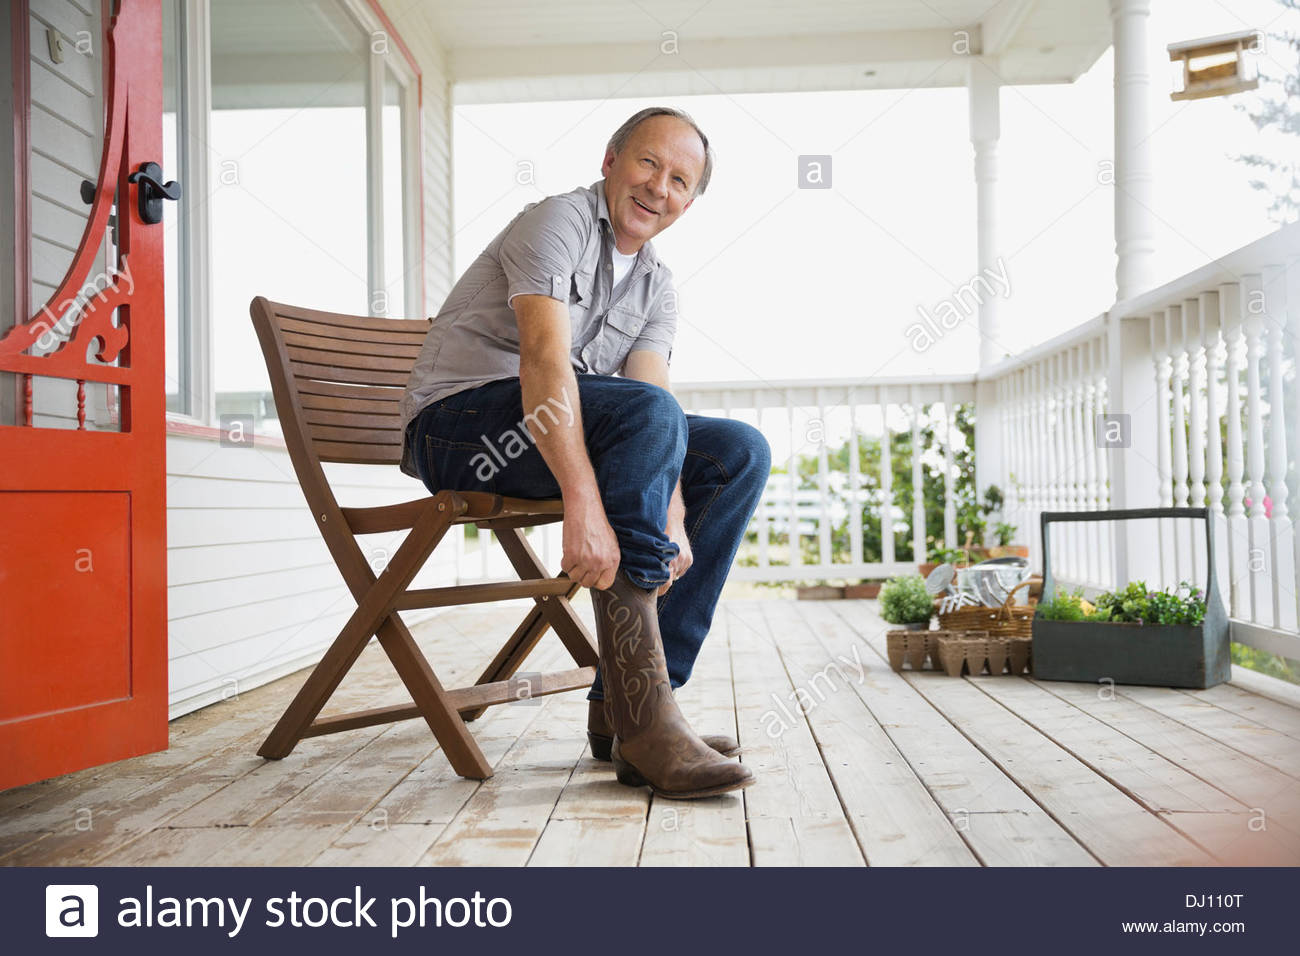 Man pulling on cowboy boots Stock Photo